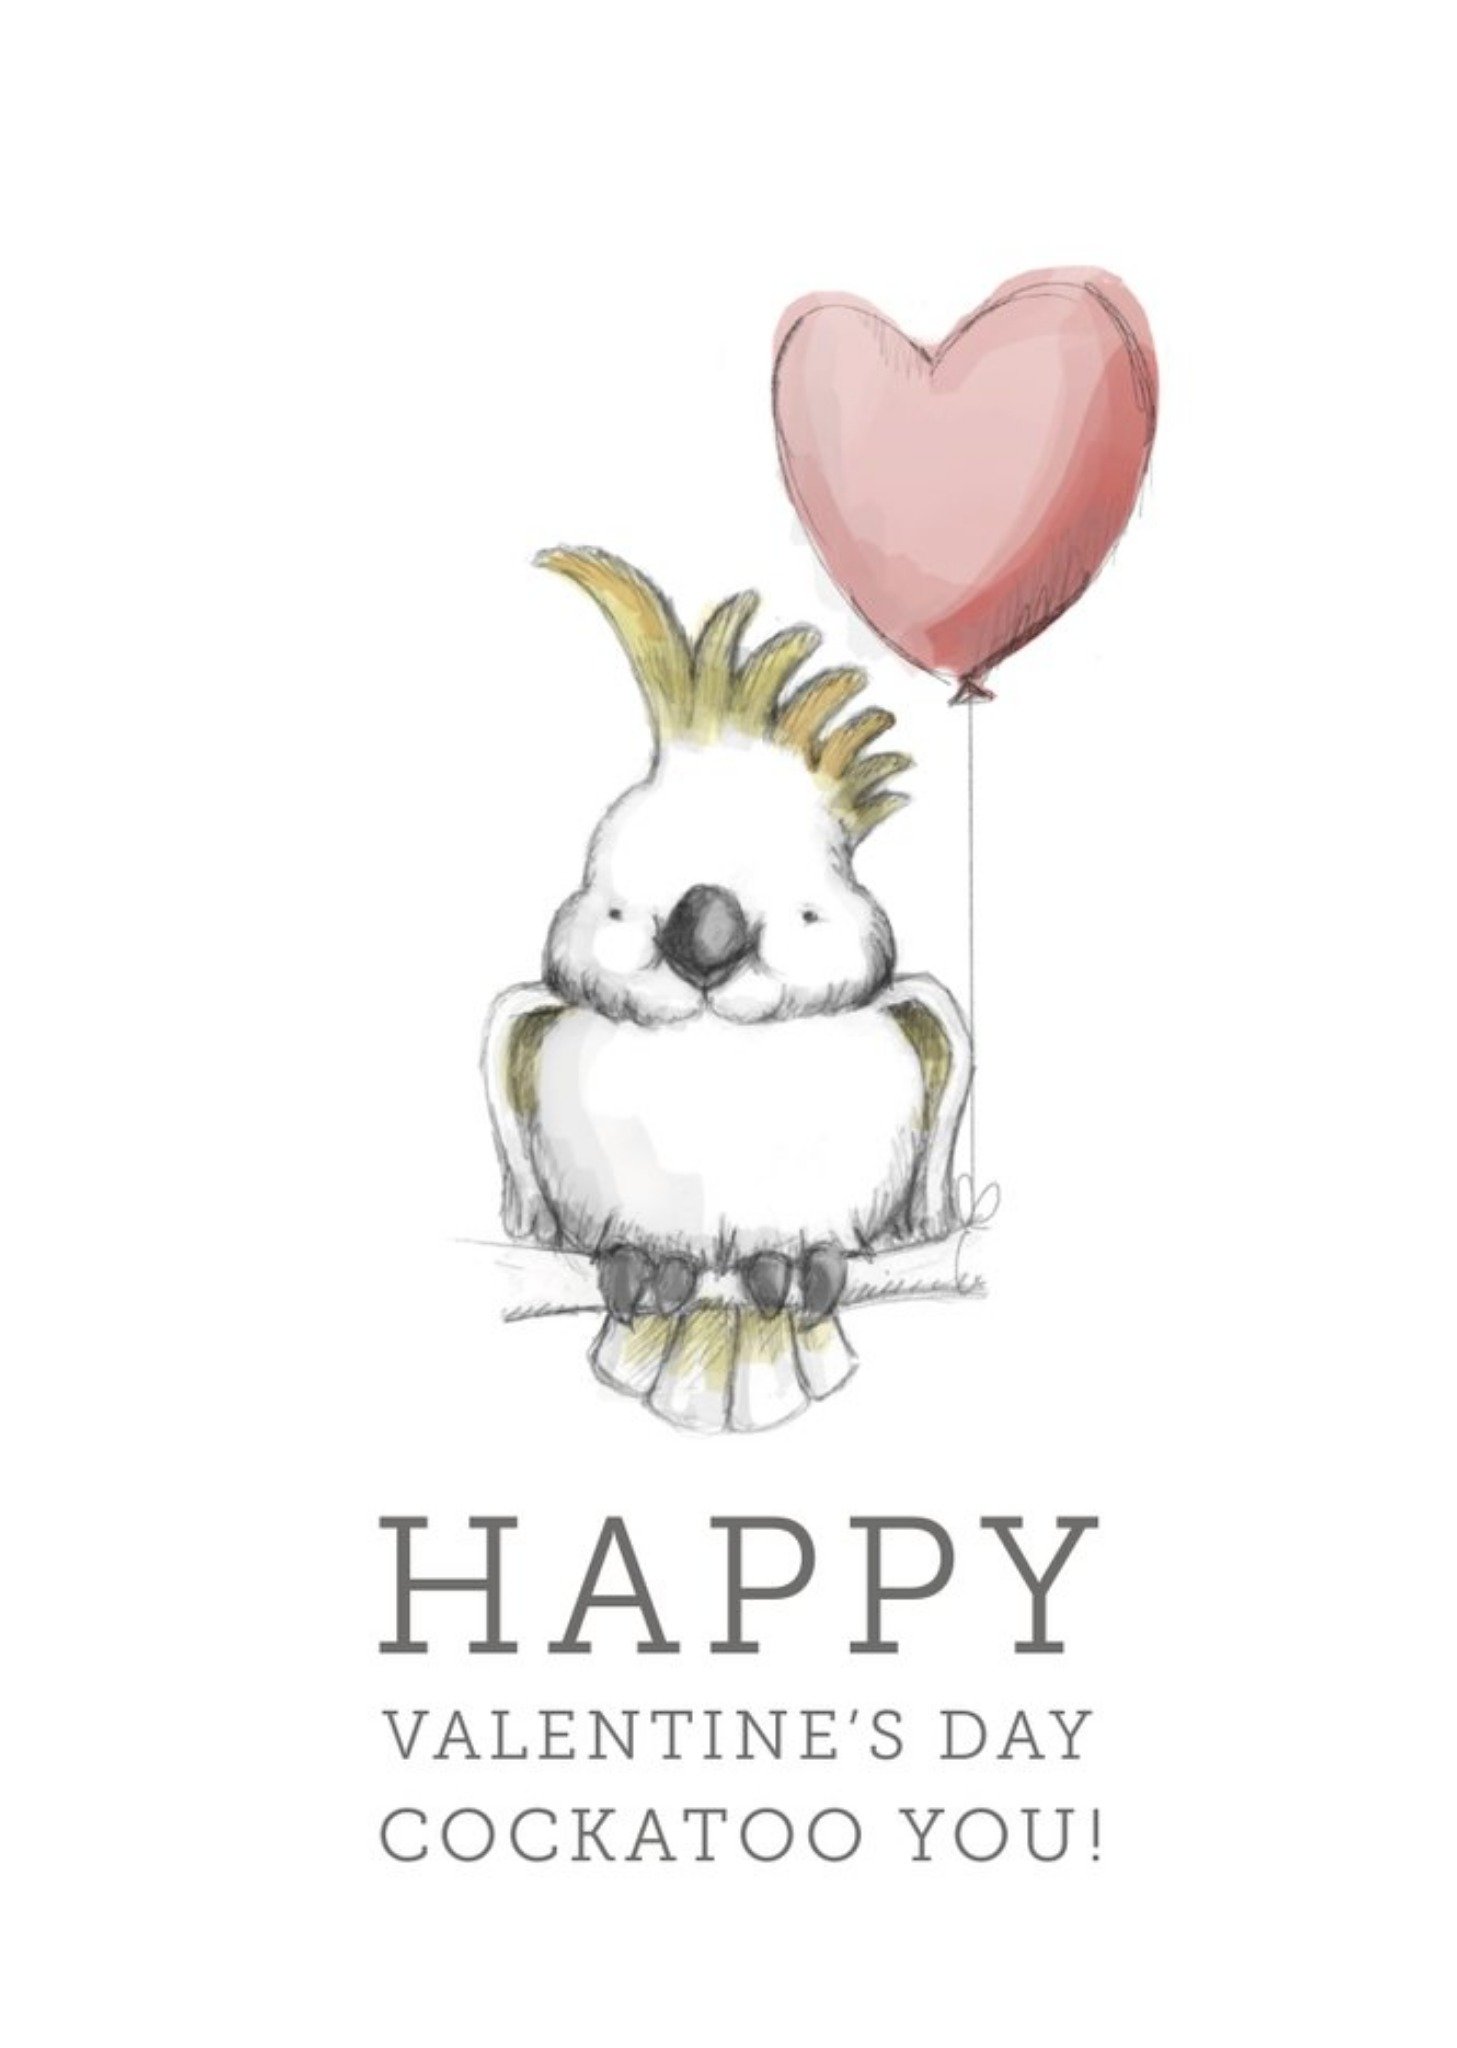 Moonpig Illustration Of A Cockatoo With A Heart Shaped Balloon Valentine's Day Card Ecard